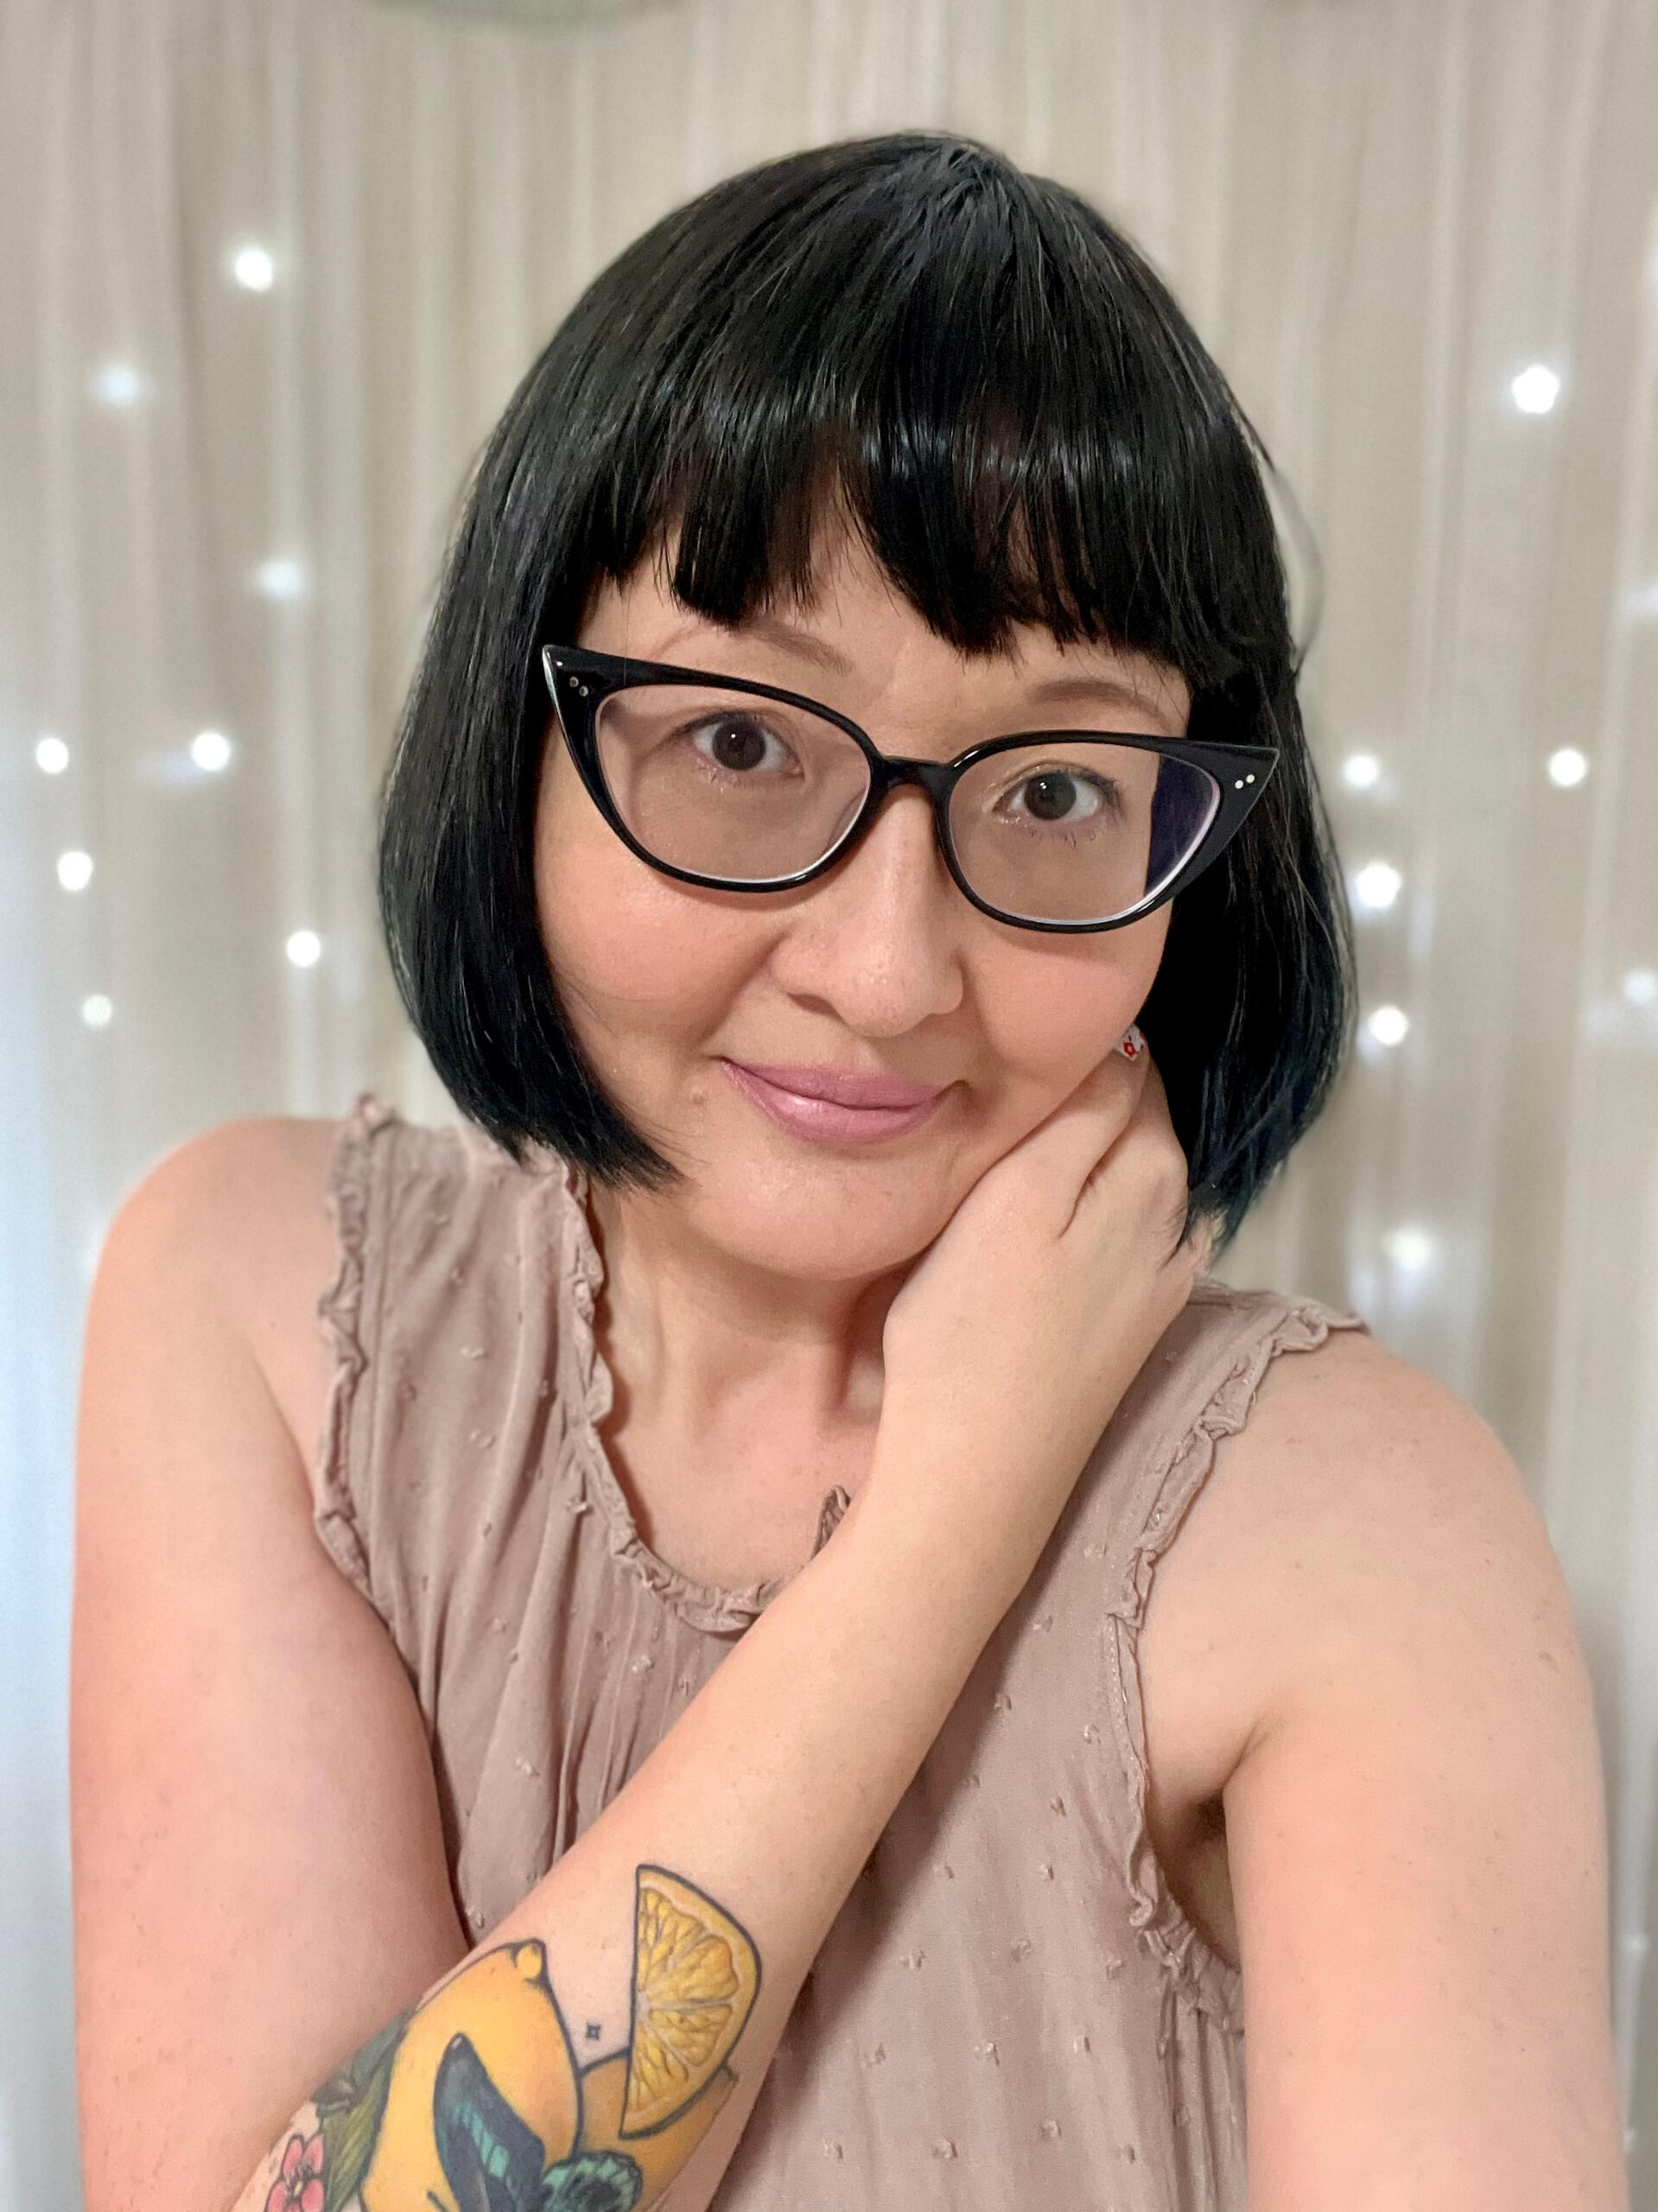 An image of me, Kat Kruger, with short teal green hair with baby bangs. I have black-rimmed cats eye glasses and am wearing a colorful moth print dress with ties at the shoulders.